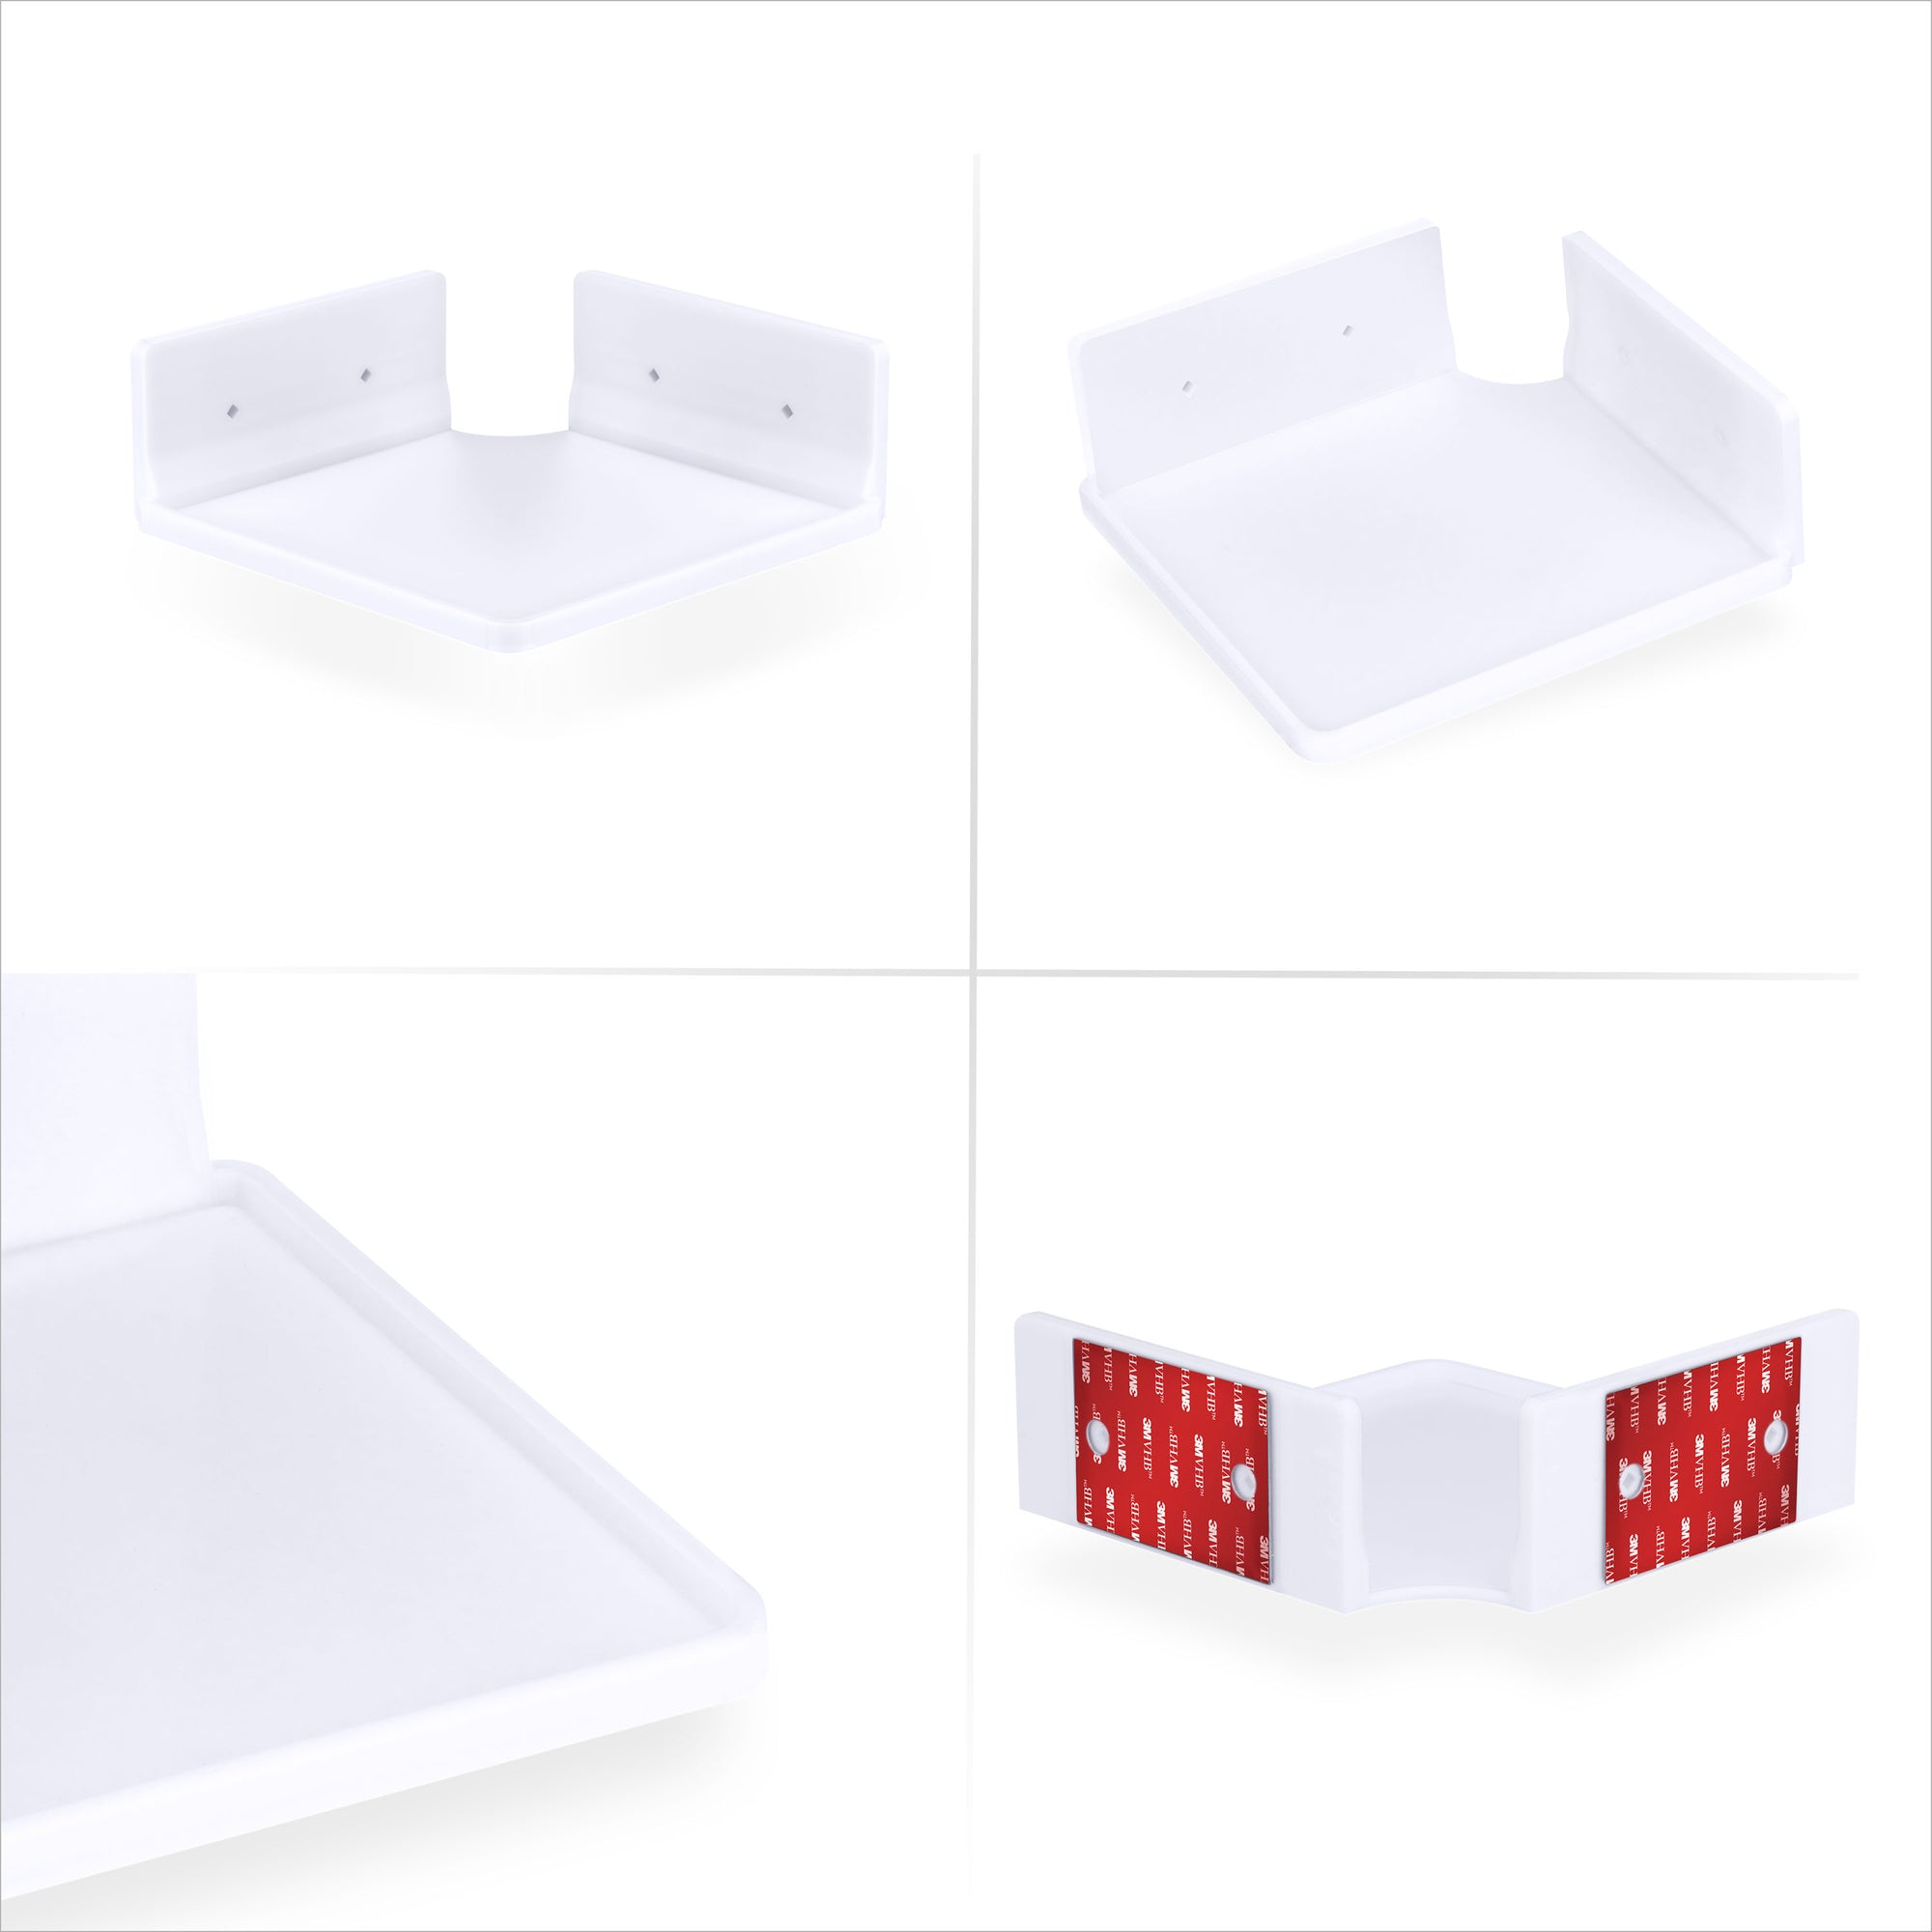 Small Adhesive Corner Floating Shelf for Security Cameras, Baby Monitors,  Speakers, Plants & More